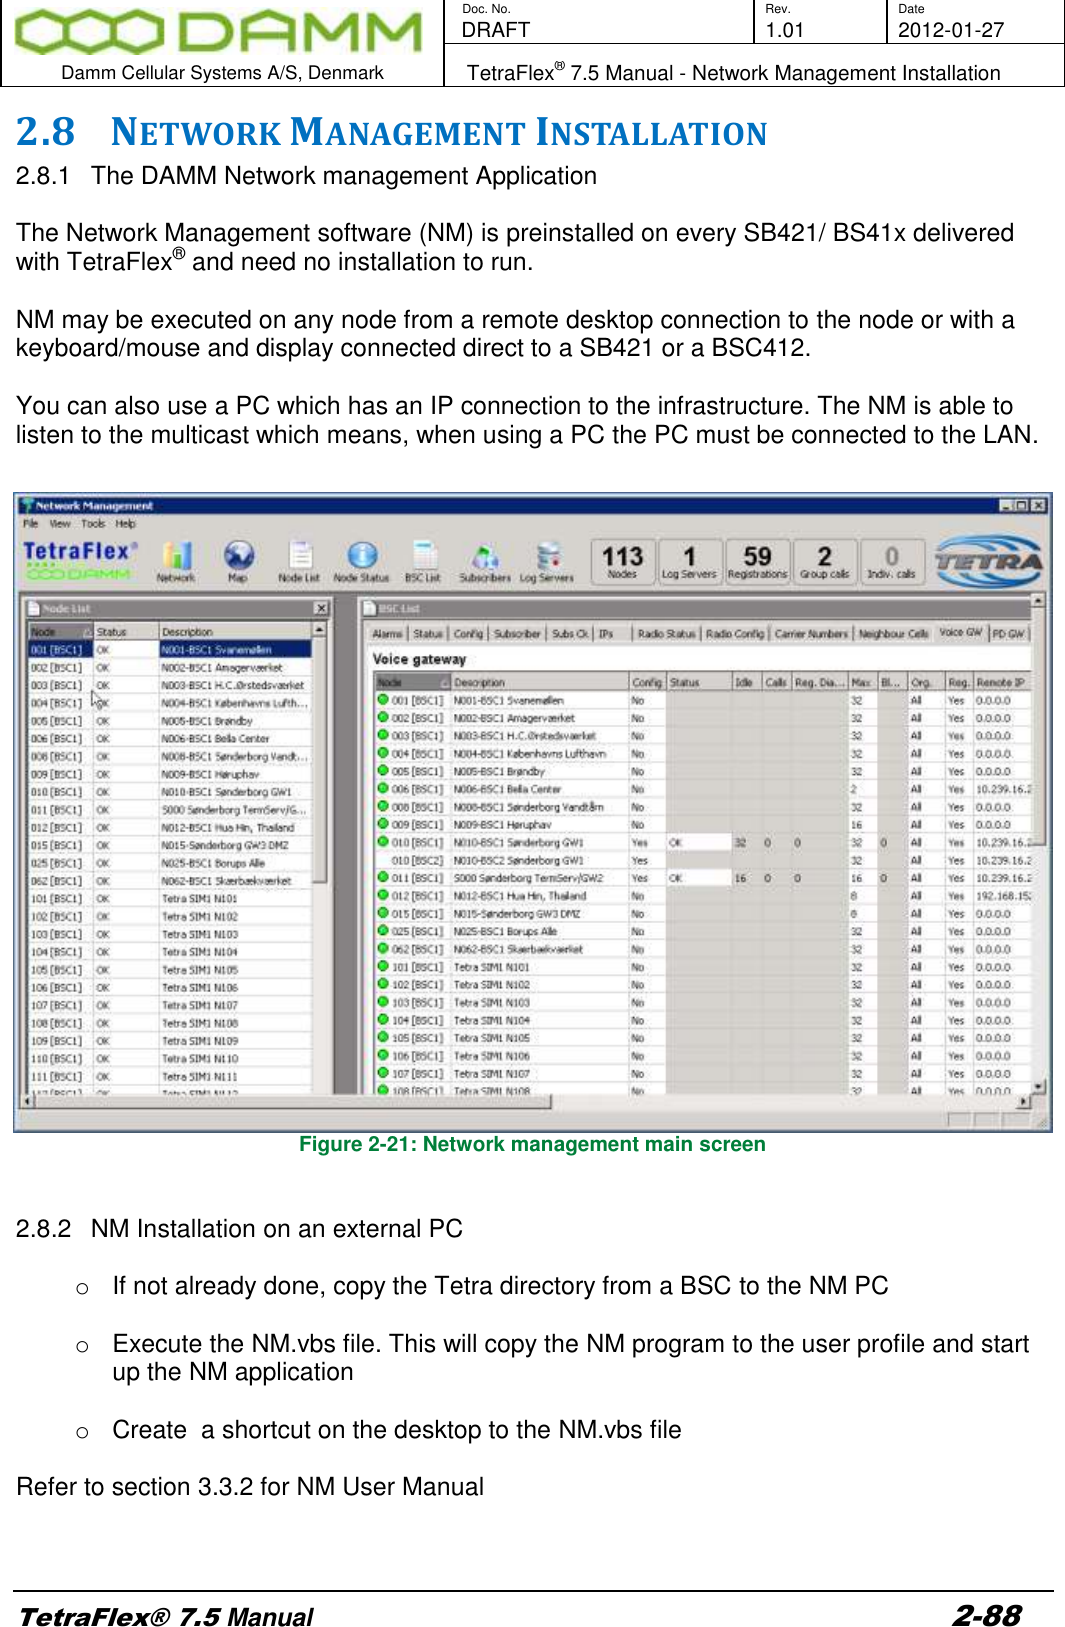        Doc. No. Rev. Date    DRAFT  1.01 2012-01-27  Damm Cellular Systems A/S, Denmark   TetraFlex® 7.5 Manual - Network Management Installation  TetraFlex® 7.5 Manual 2-88 2.8 NETWORK MANAGEMENT INSTALLATION 2.8.1  The DAMM Network management Application  The Network Management software (NM) is preinstalled on every SB421/ BS41x delivered with TetraFlex® and need no installation to run.  NM may be executed on any node from a remote desktop connection to the node or with a keyboard/mouse and display connected direct to a SB421 or a BSC412.   You can also use a PC which has an IP connection to the infrastructure. The NM is able to listen to the multicast which means, when using a PC the PC must be connected to the LAN.  Figure 2-21: Network management main screen   2.8.2  NM Installation on an external PC  o  If not already done, copy the Tetra directory from a BSC to the NM PC  o  Execute the NM.vbs file. This will copy the NM program to the user profile and start up the NM application  o  Create  a shortcut on the desktop to the NM.vbs file   Refer to section 3.3.2 for NM User Manual    